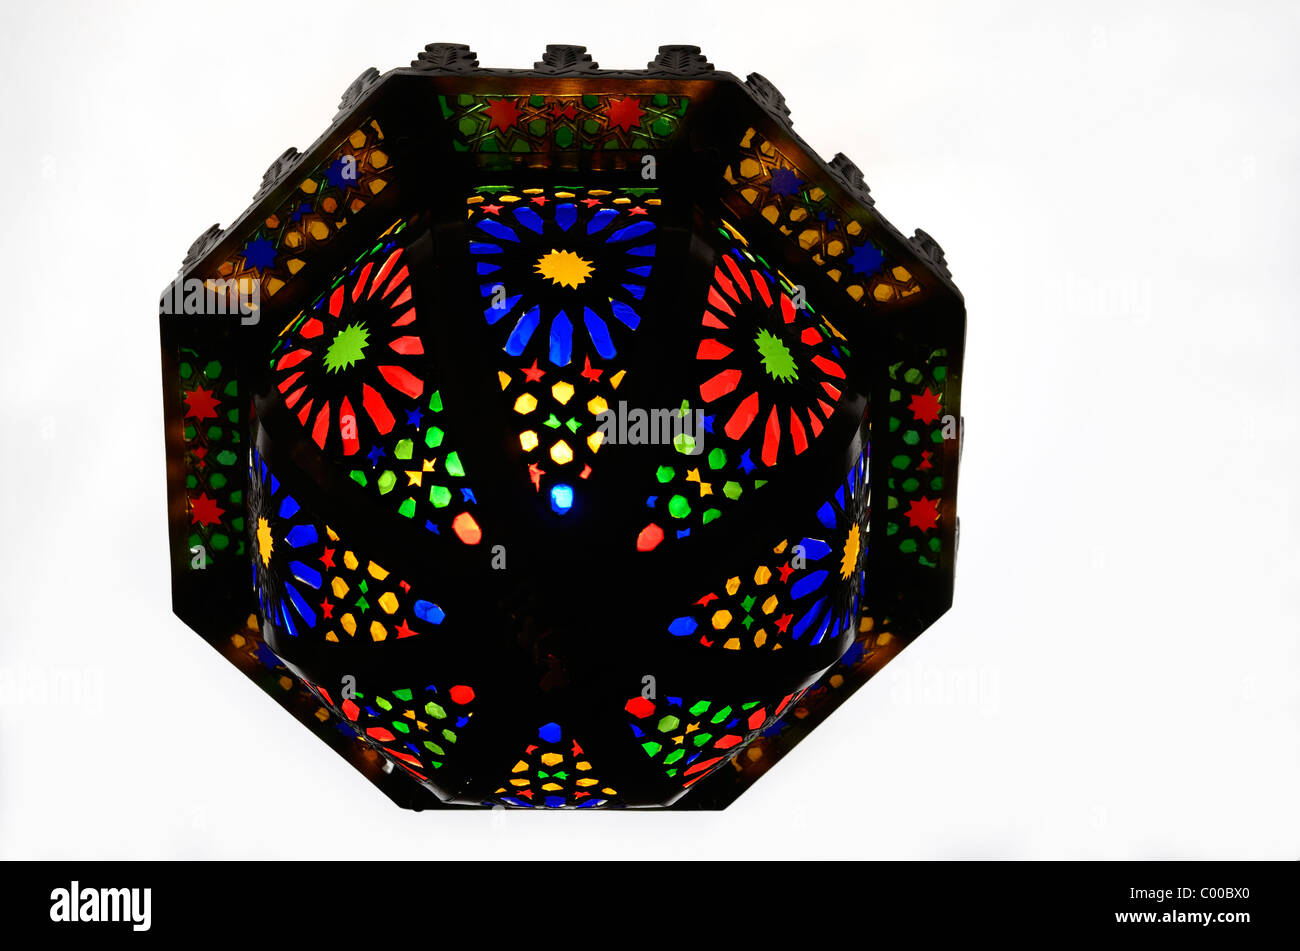 Classic Moroccan stained glass ceiling light fixture in Fes Morocco Stock Photo